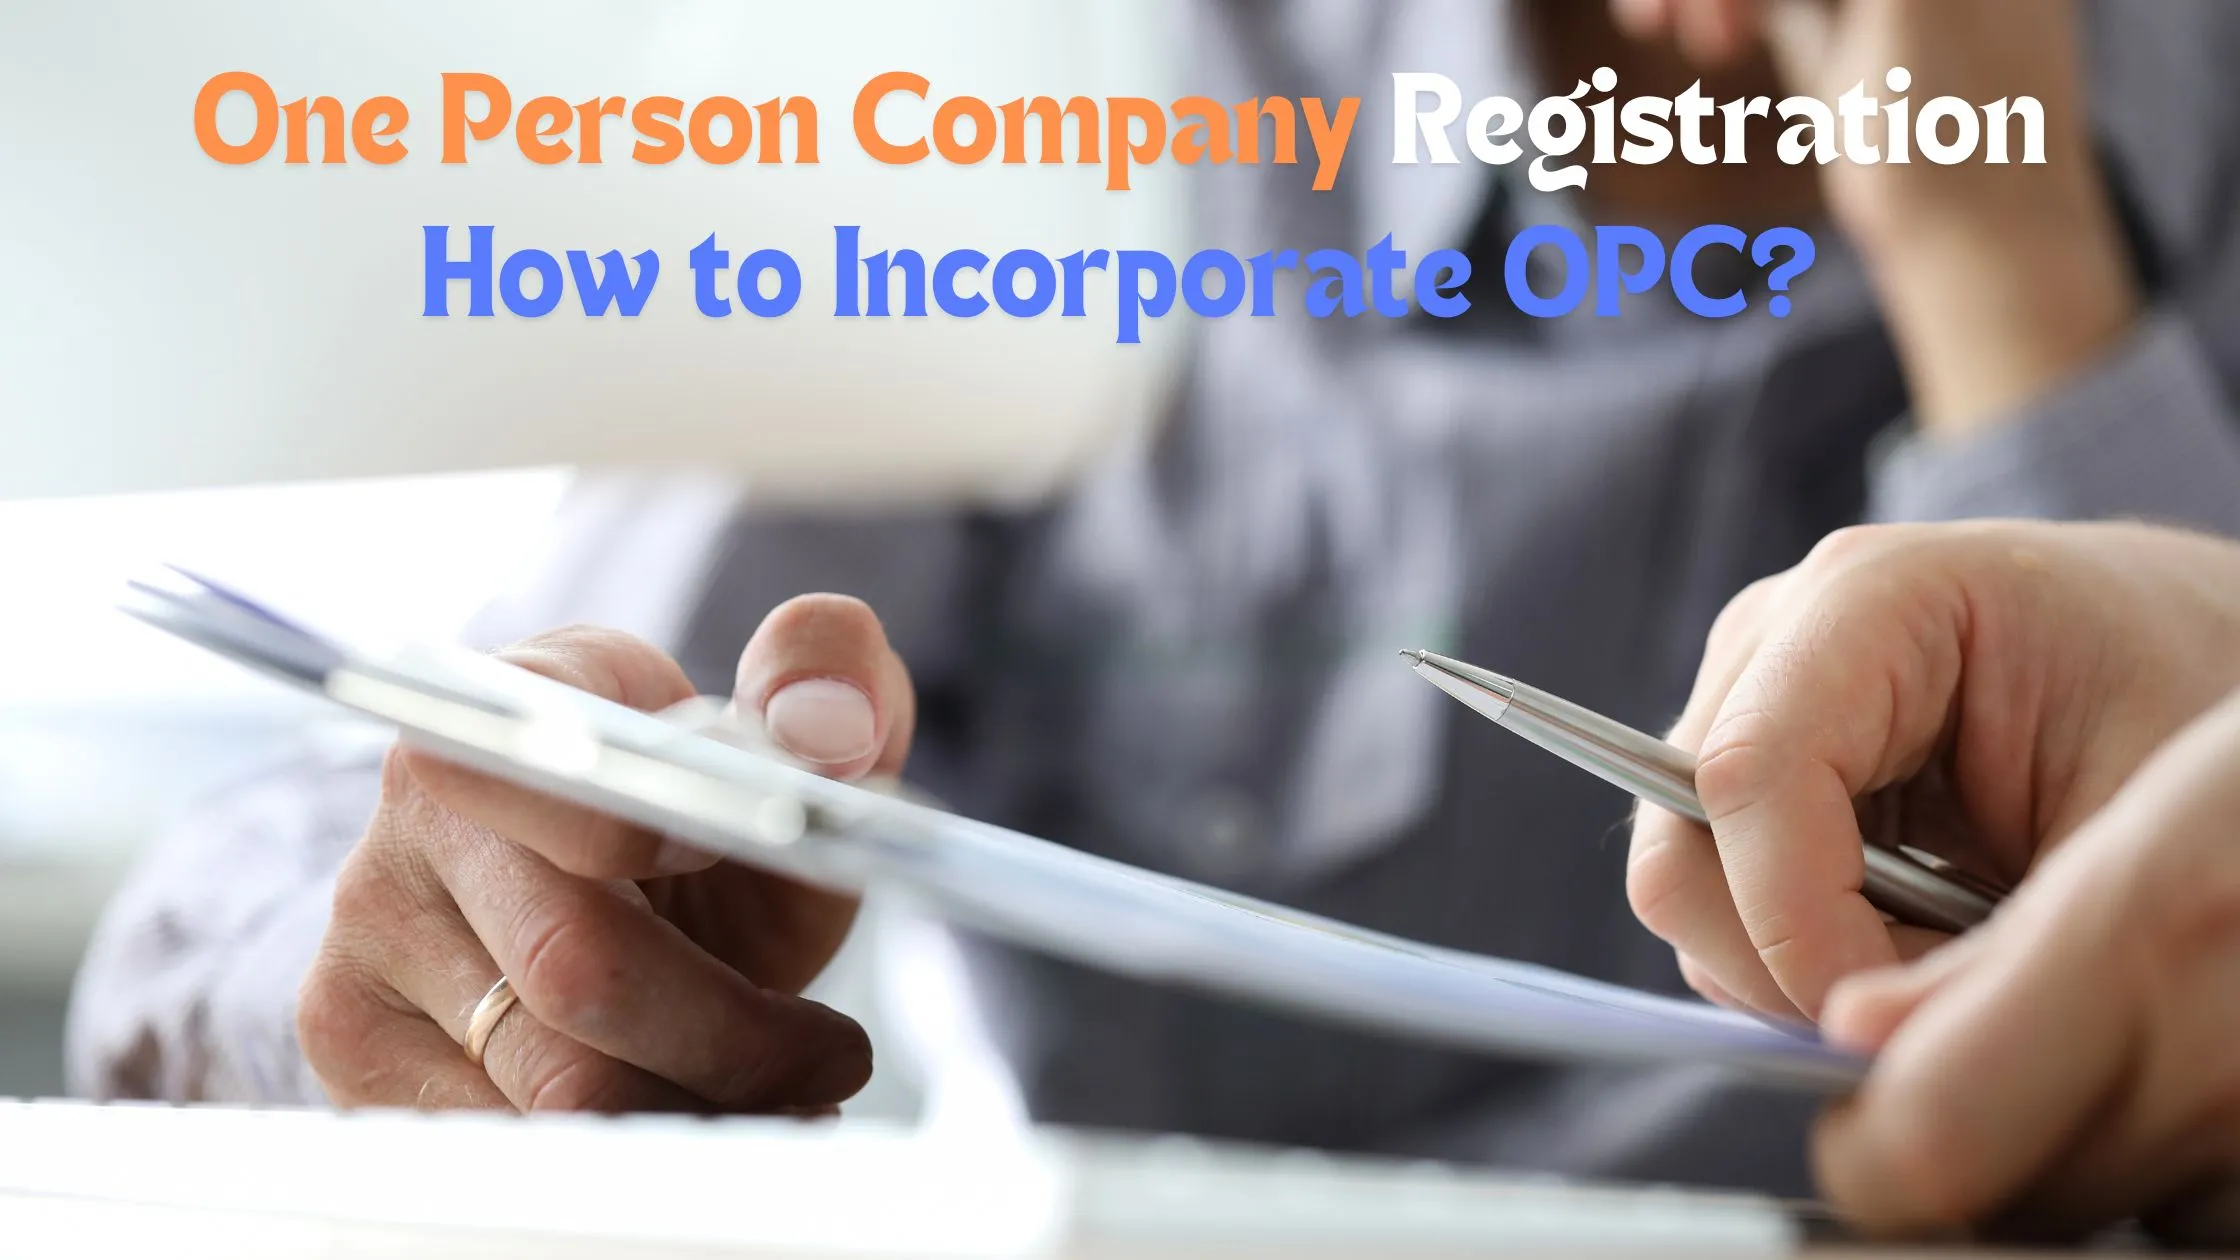 One Person Company Registration in India: How to Incorporate OPC?